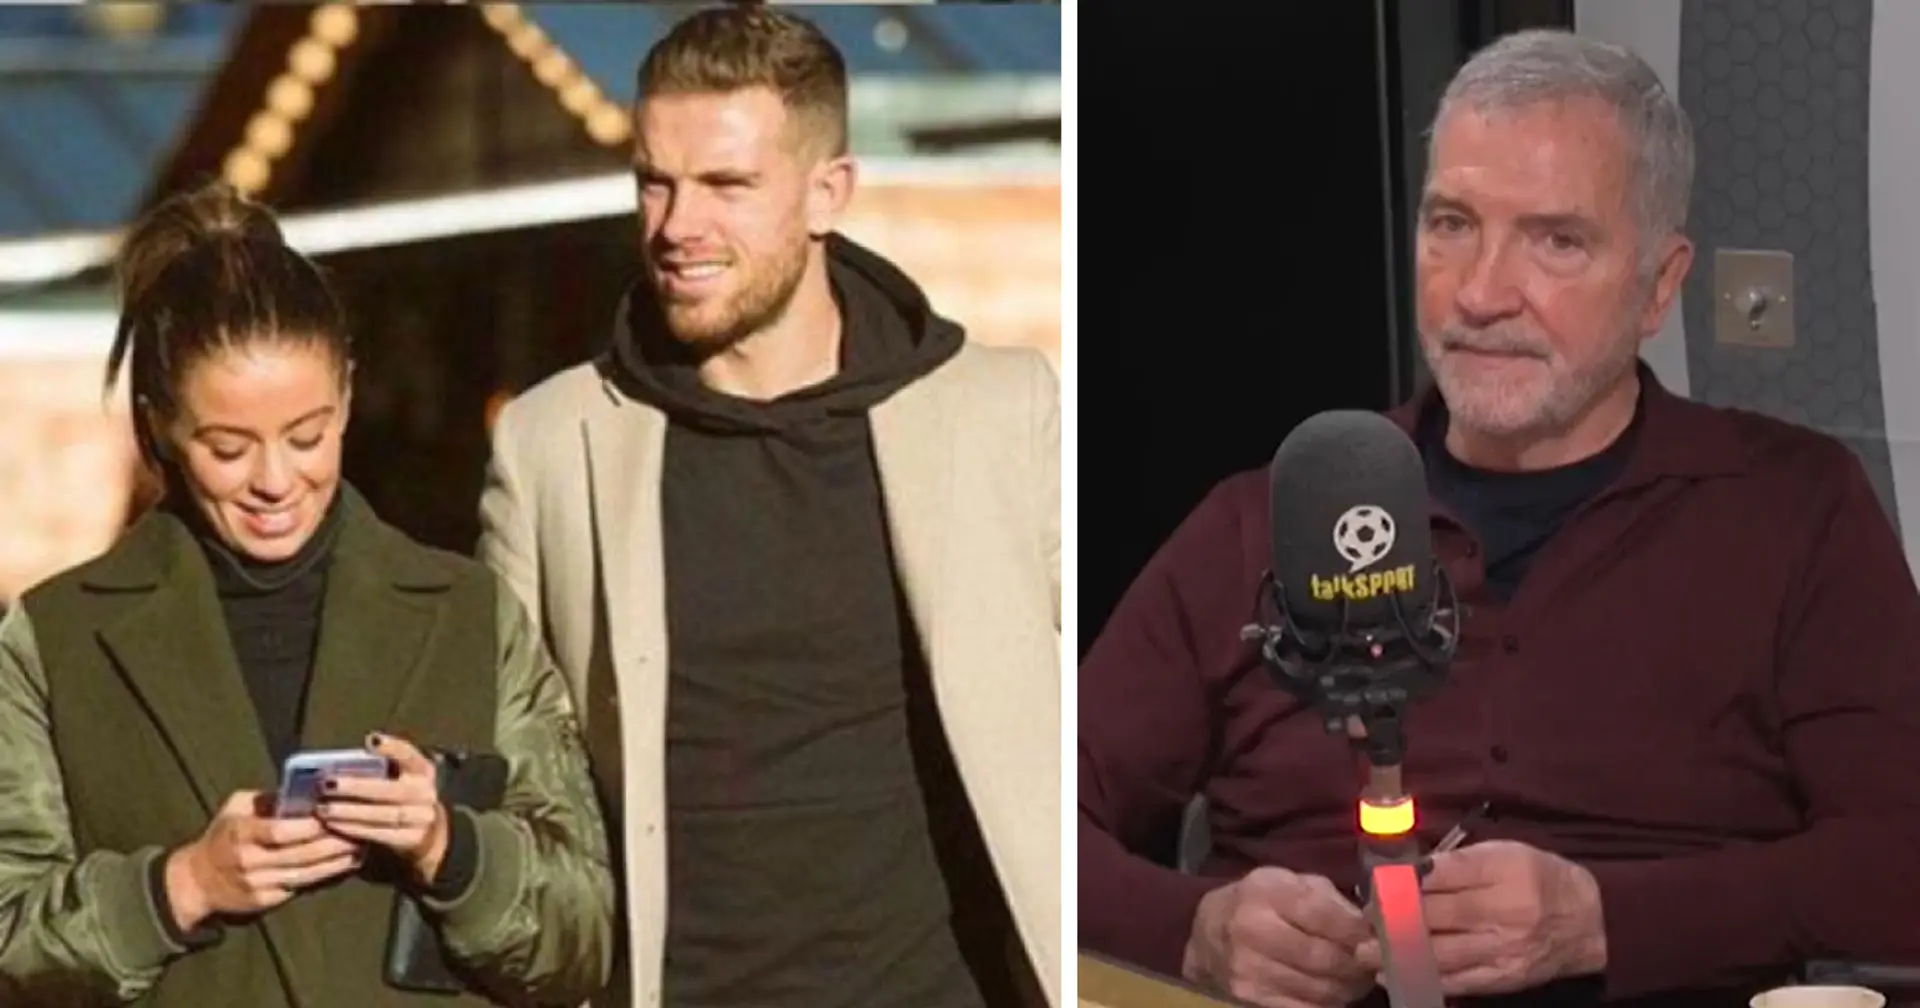 'I am second guessing, but': Souness believes Henderson wants to leave Al Ettifaq because of his wife